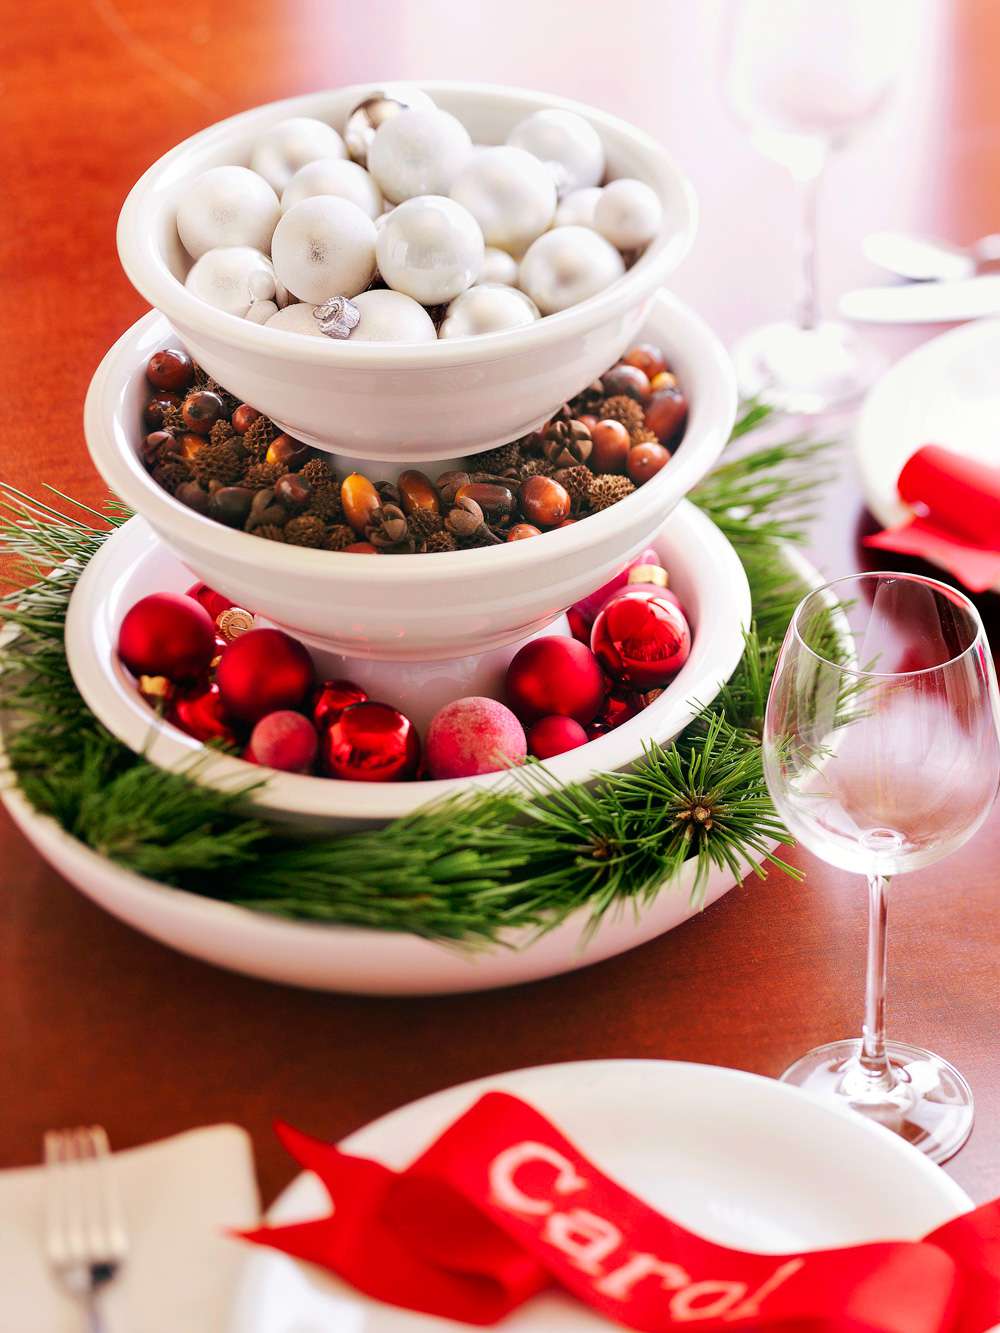 50 Easy Christmas Centerpiece Ideas Midwest Living